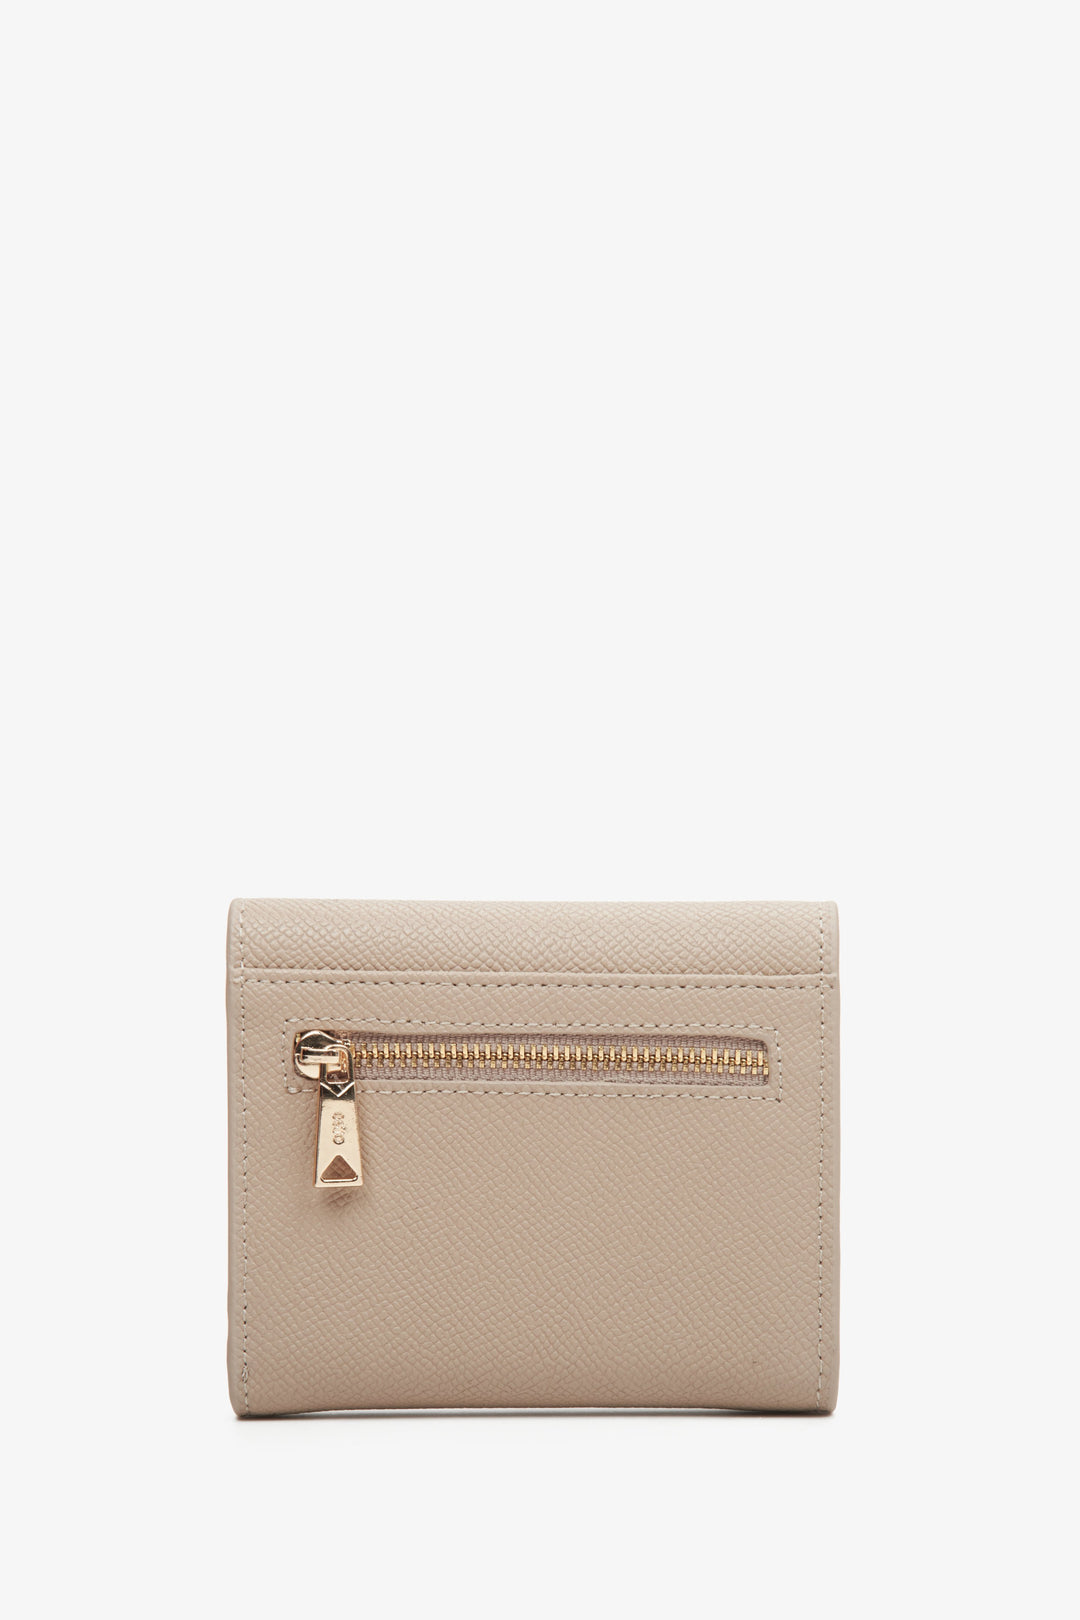 Estro women's leather wallet in beige with a gold clasp and accents - reverse side.